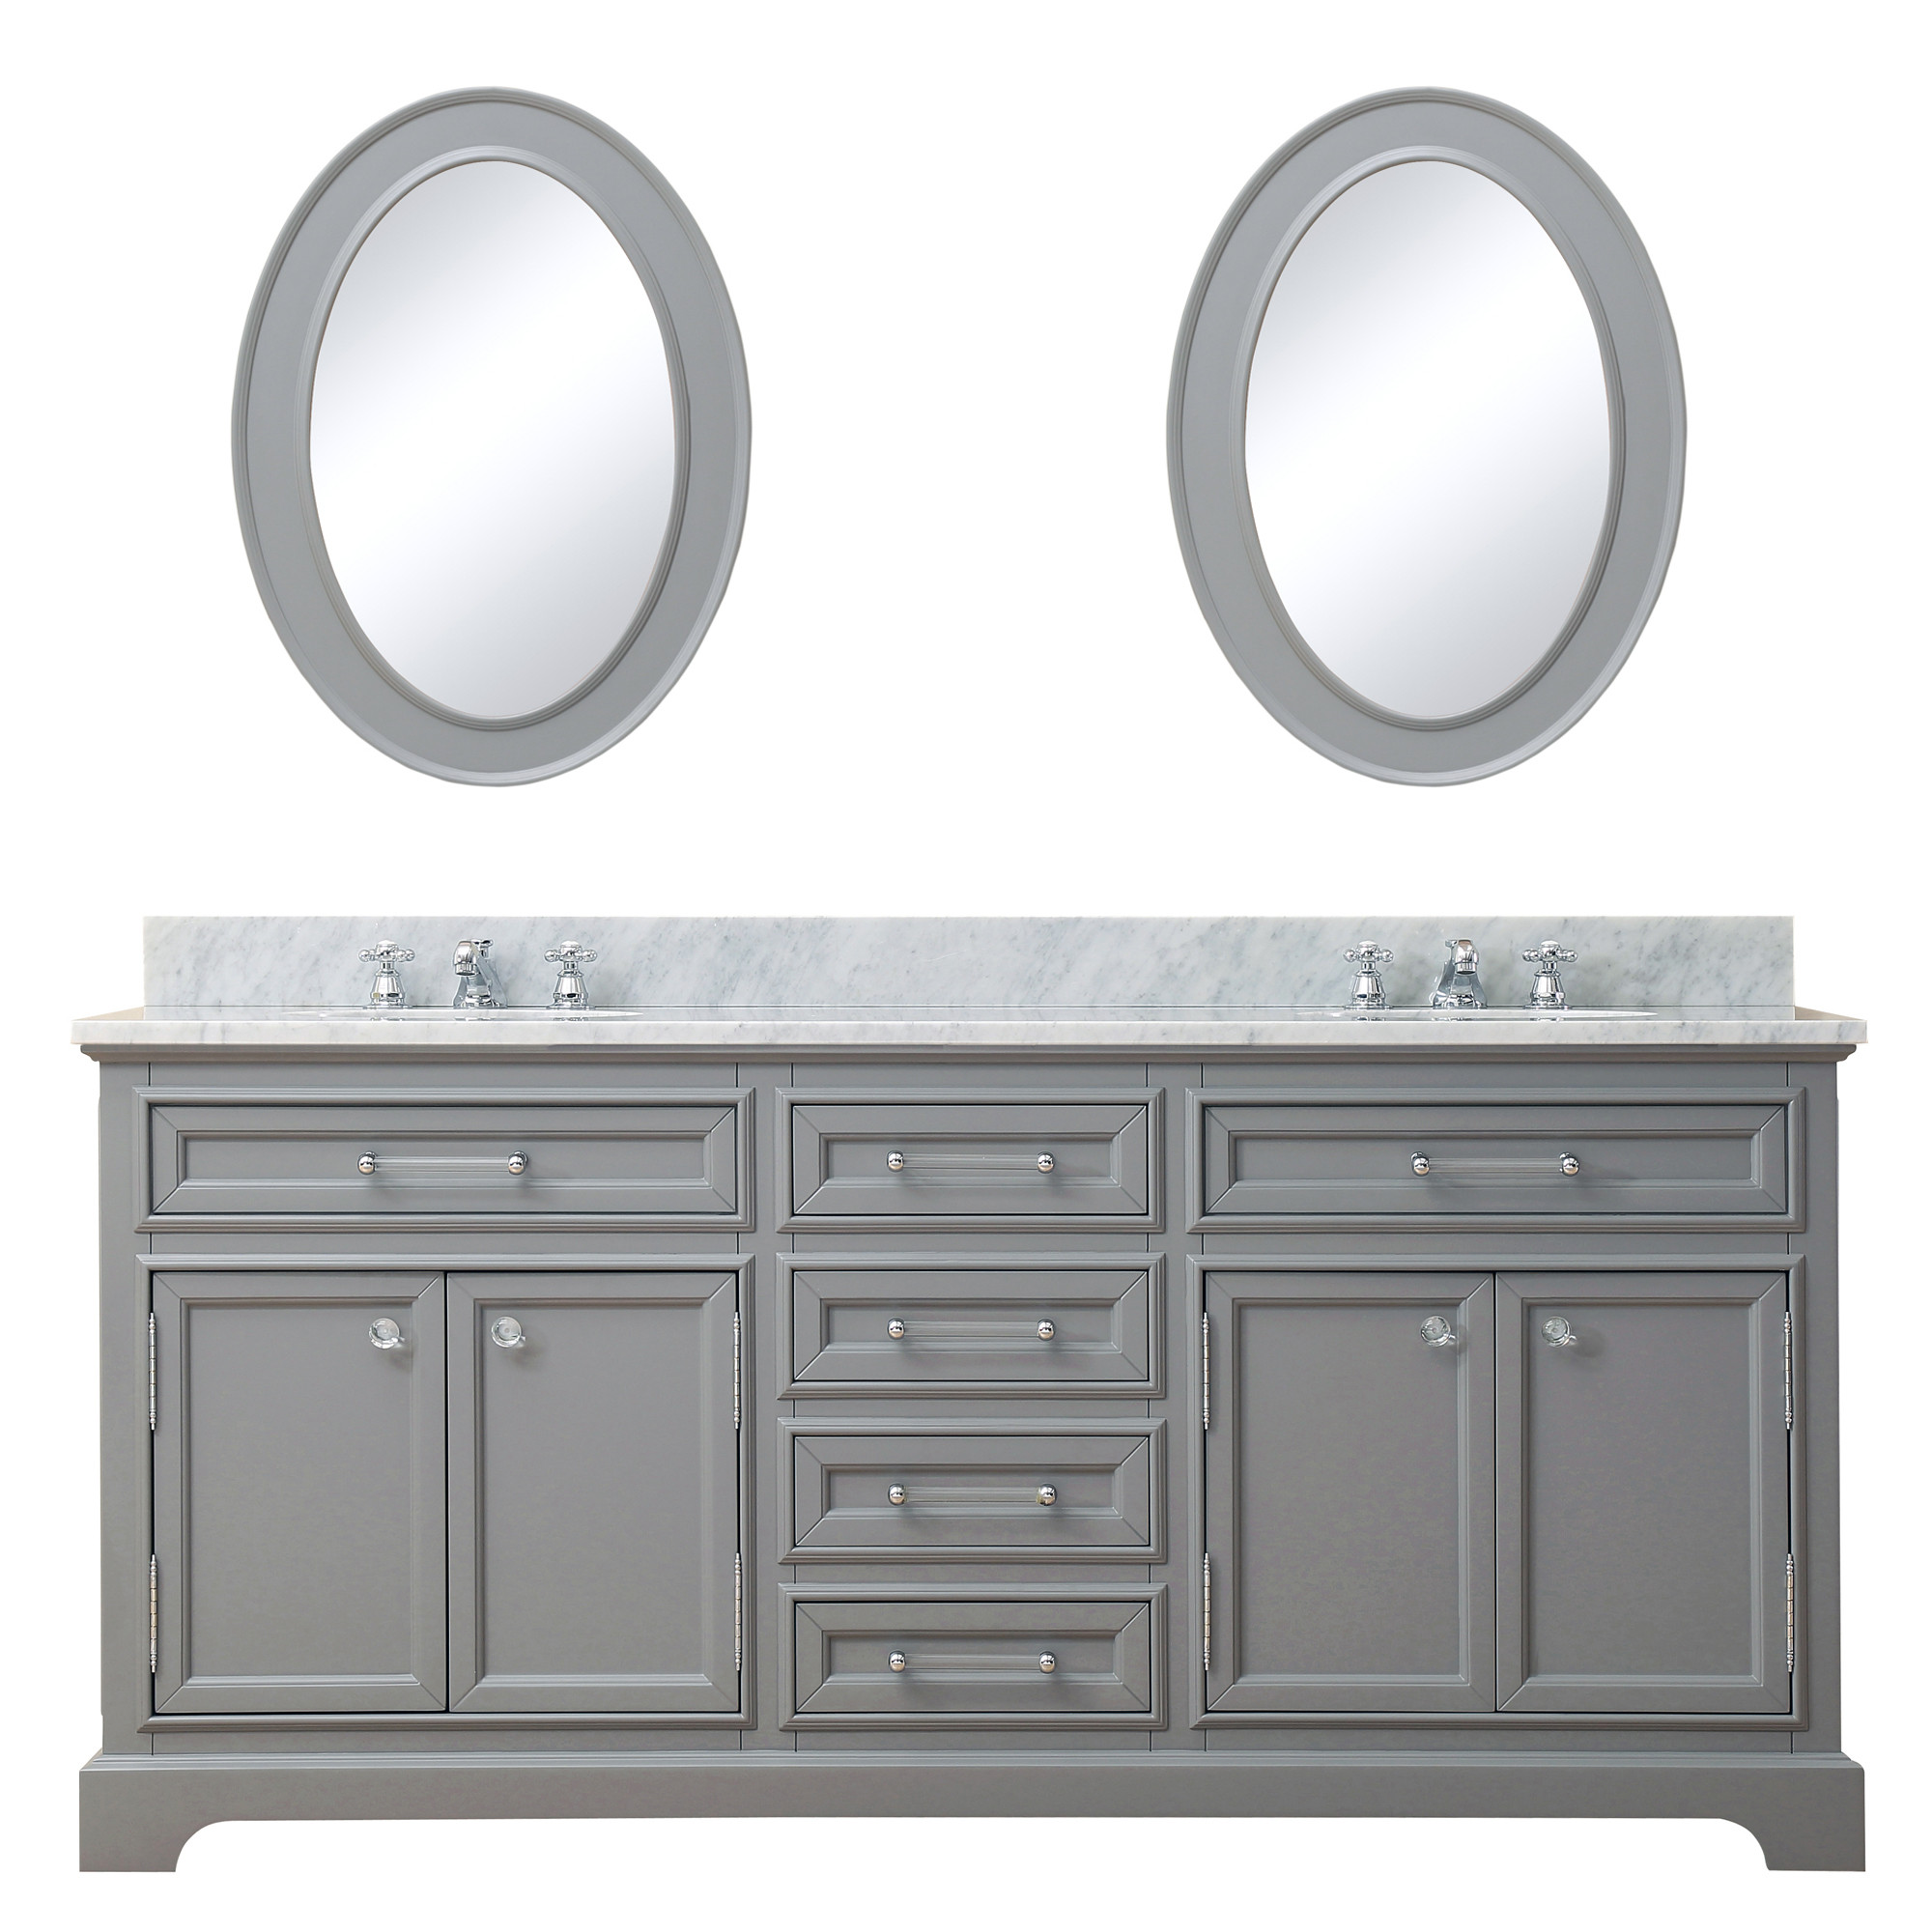 Water Creation Derby72GB Double Sink Bathroom Wood Vanity with Mirrors